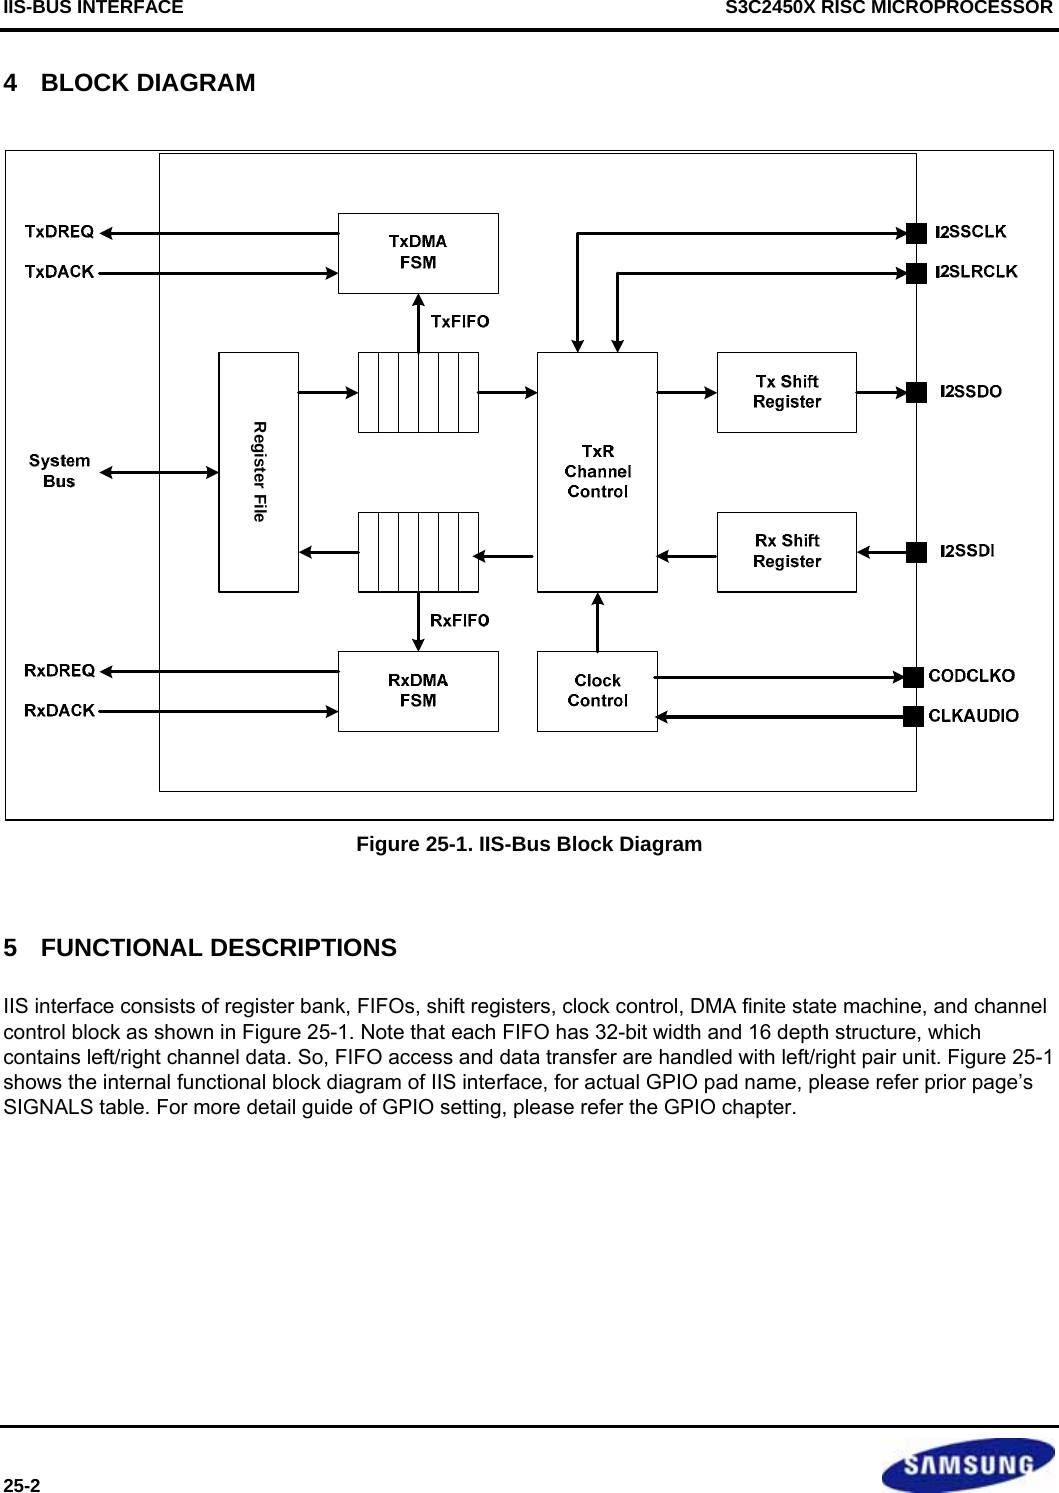 IIS-BUS INTERFACE     S3C2450X RISC MICROPROCESSOR 25-2   4  BLOCK DIAGRAM Register File Figure 25-1. IIS-Bus Block Diagram  5  FUNCTIONAL DESCRIPTIONS IIS interface consists of register bank, FIFOs, shift registers, clock control, DMA finite state machine, and channel control block as shown in Figure 25-1. Note that each FIFO has 32-bit width and 16 depth structure, which contains left/right channel data. So, FIFO access and data transfer are handled with left/right pair unit. Figure 25-1 shows the internal functional block diagram of IIS interface, for actual GPIO pad name, please refer prior page’s SIGNALS table. For more detail guide of GPIO setting, please refer the GPIO chapter.  